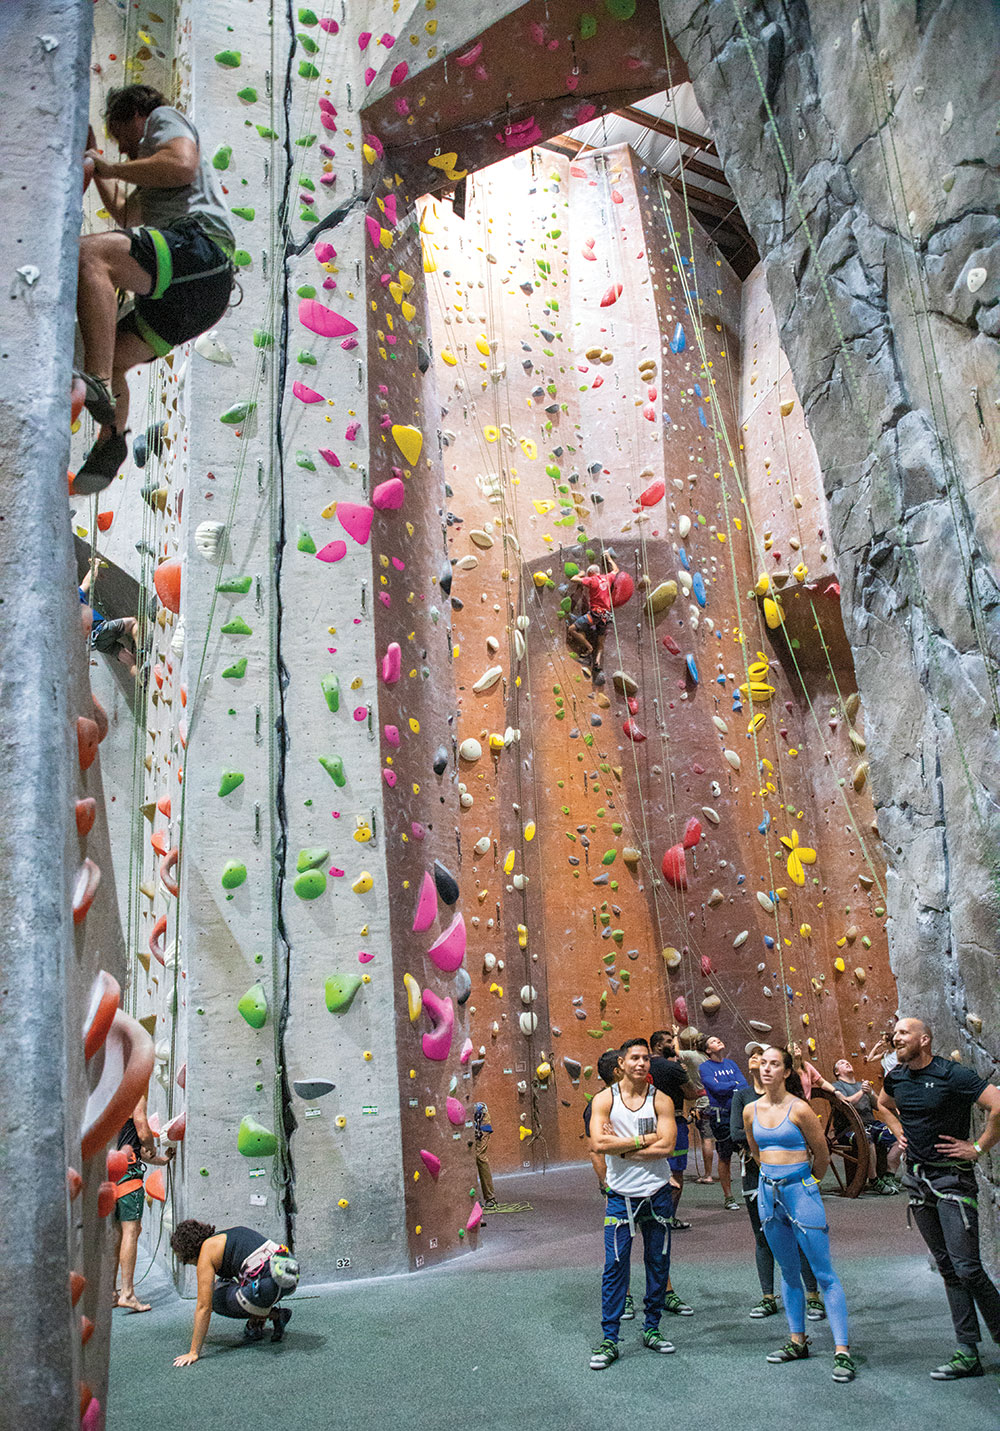 Rock climbers scale wall at indoor facility